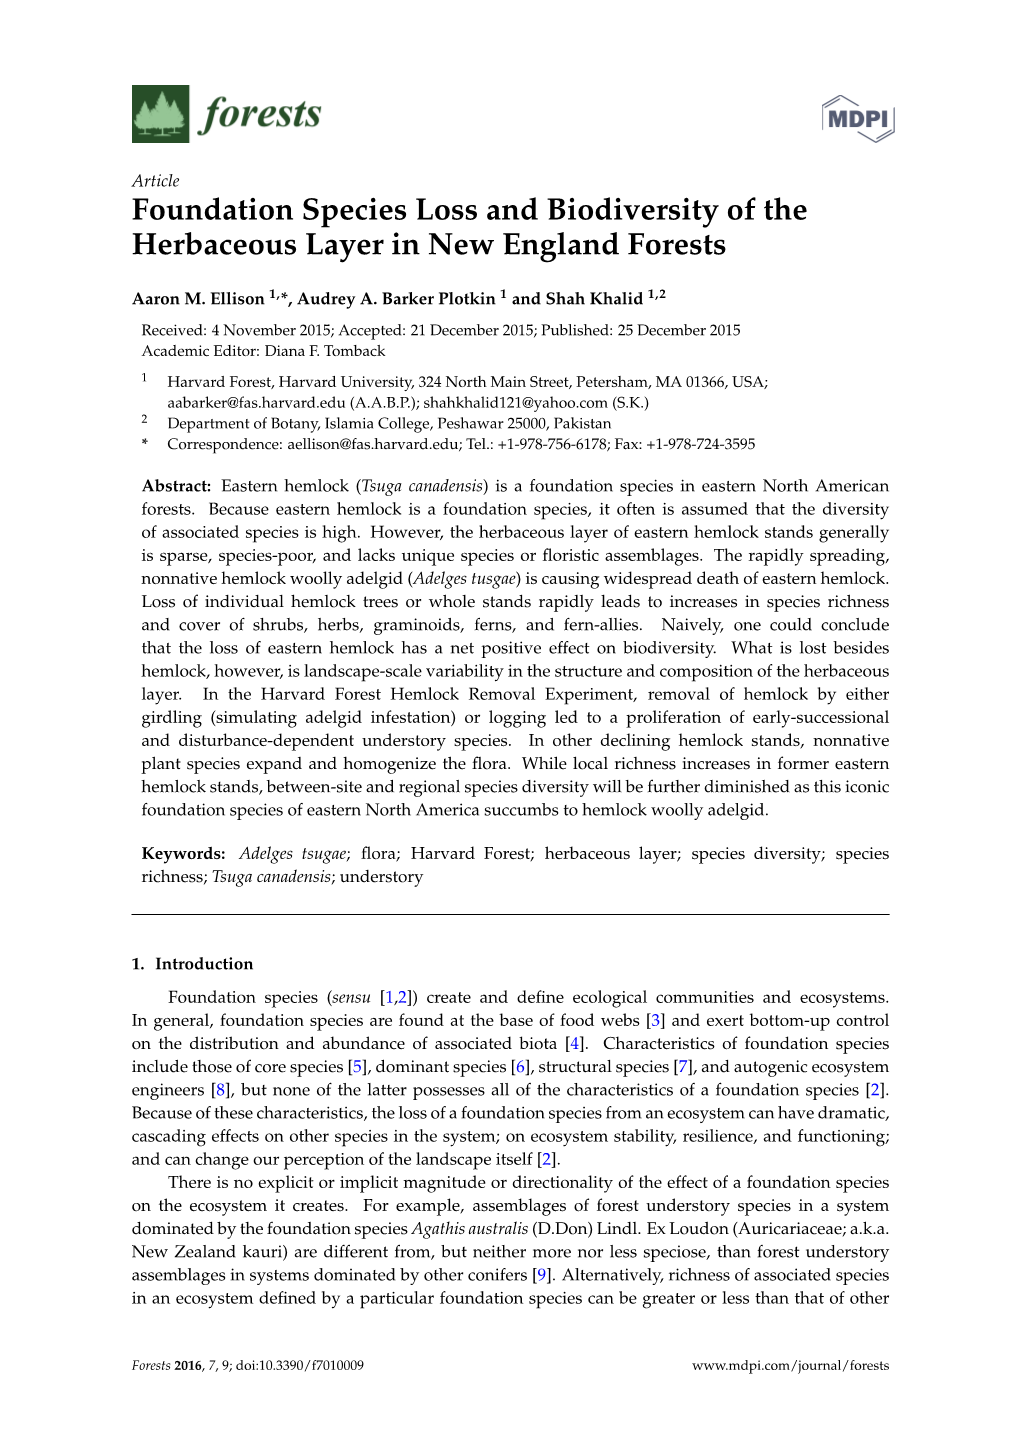 Foundation Species Loss and Biodiversity of the Herbaceous Layer in New England Forests